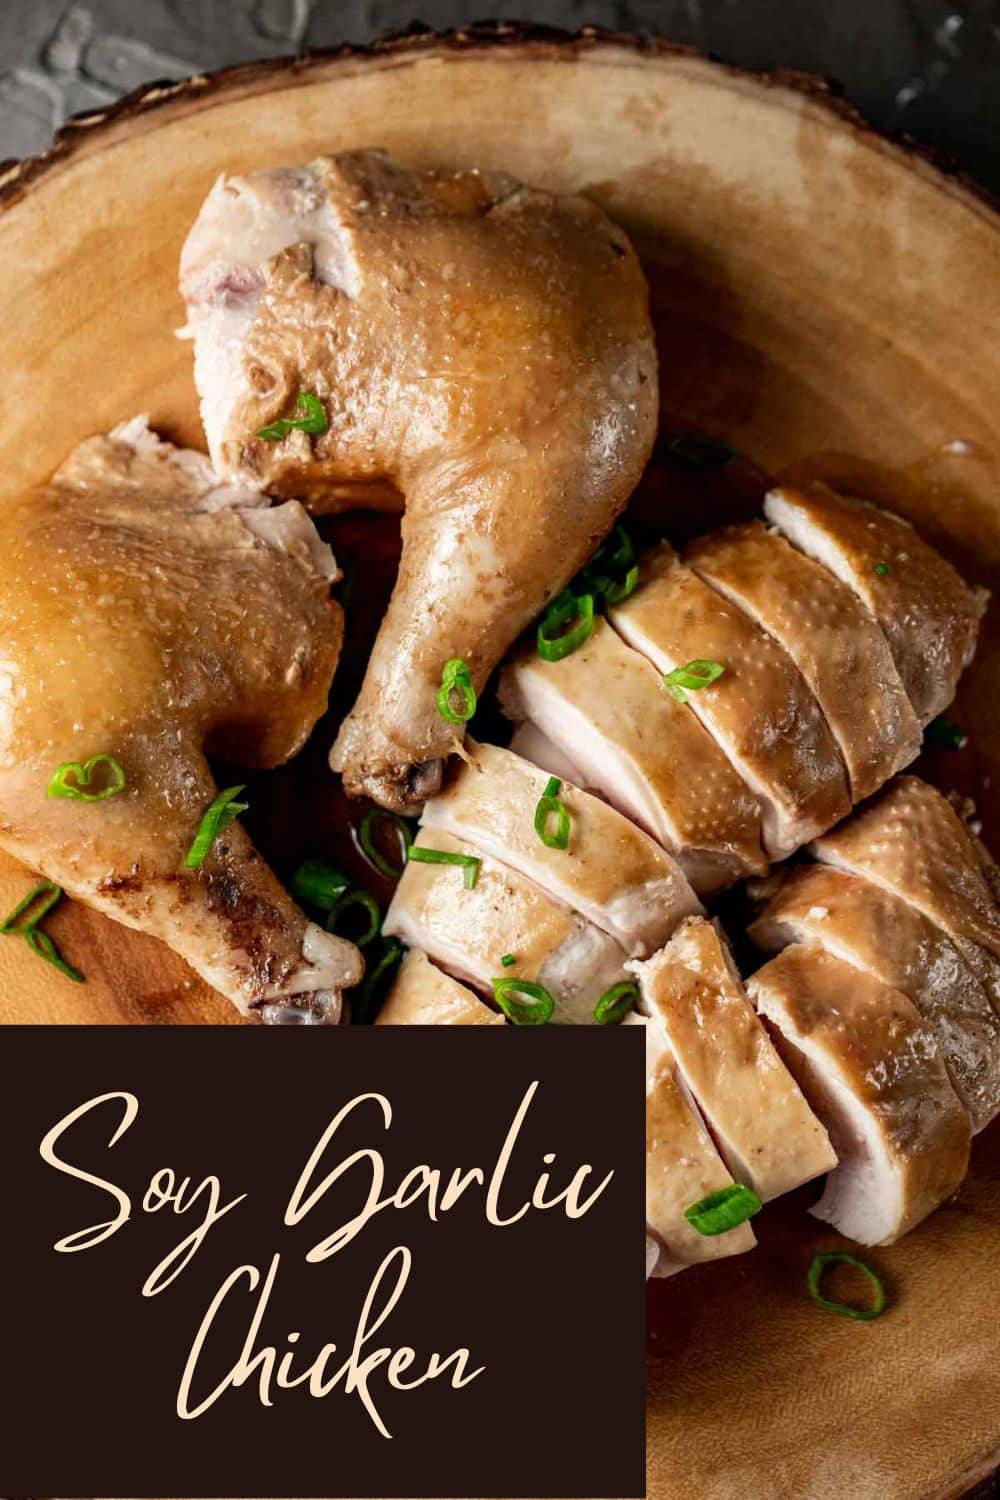 Soy Garlic Chicken: A Flavor Explosion in Every Bite